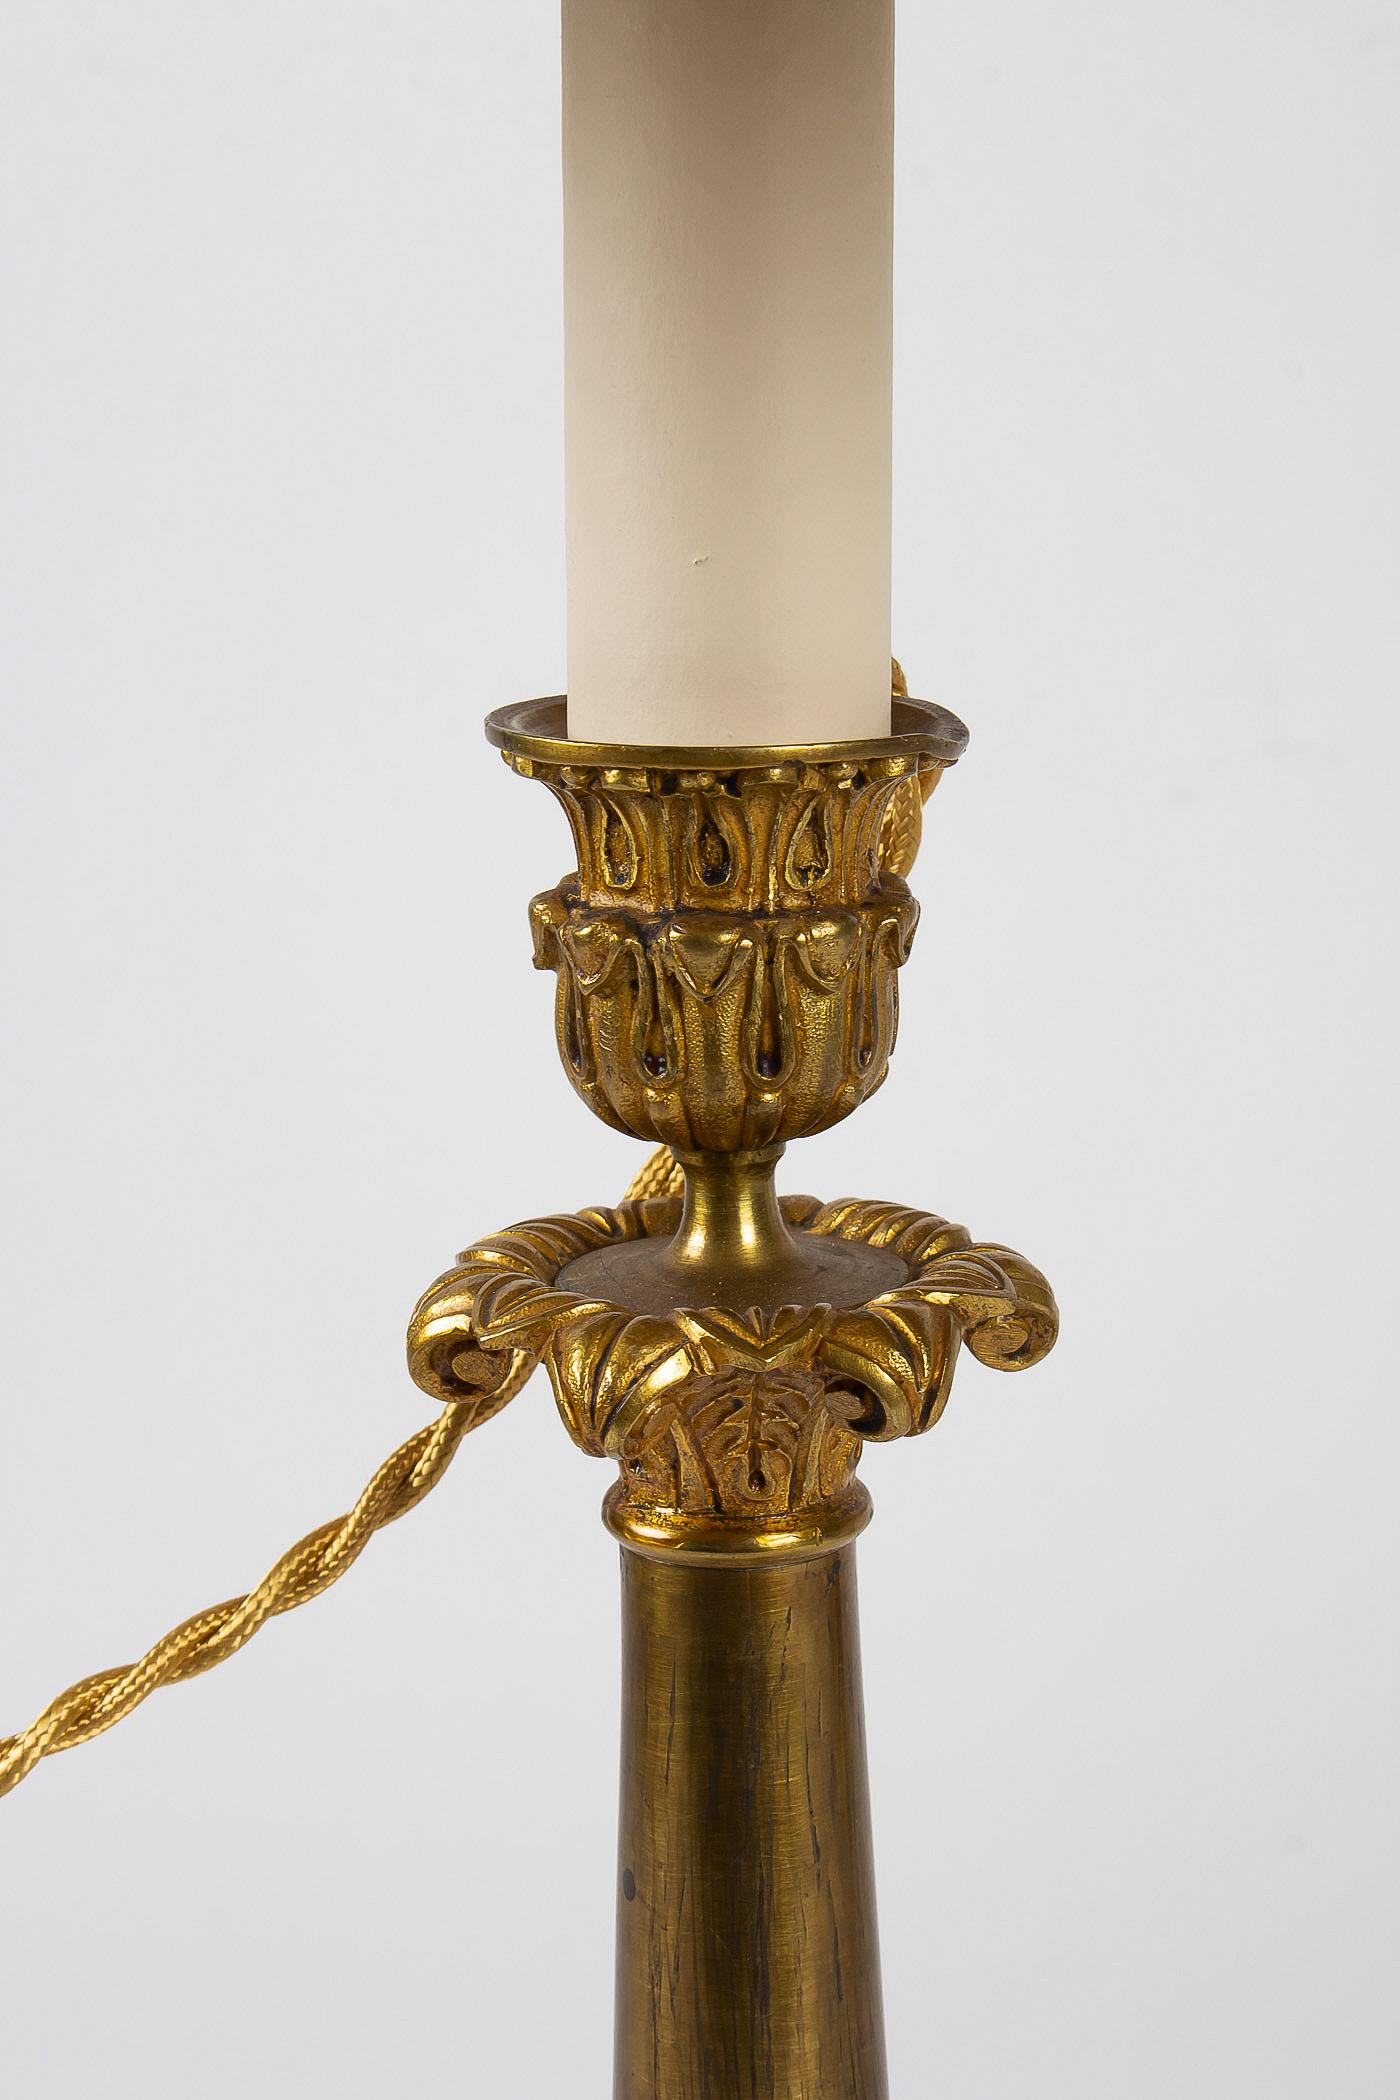 Restoration Period, Converted in Table Lamps, Pair of Small Bronze Candlesticks (Vergoldet)